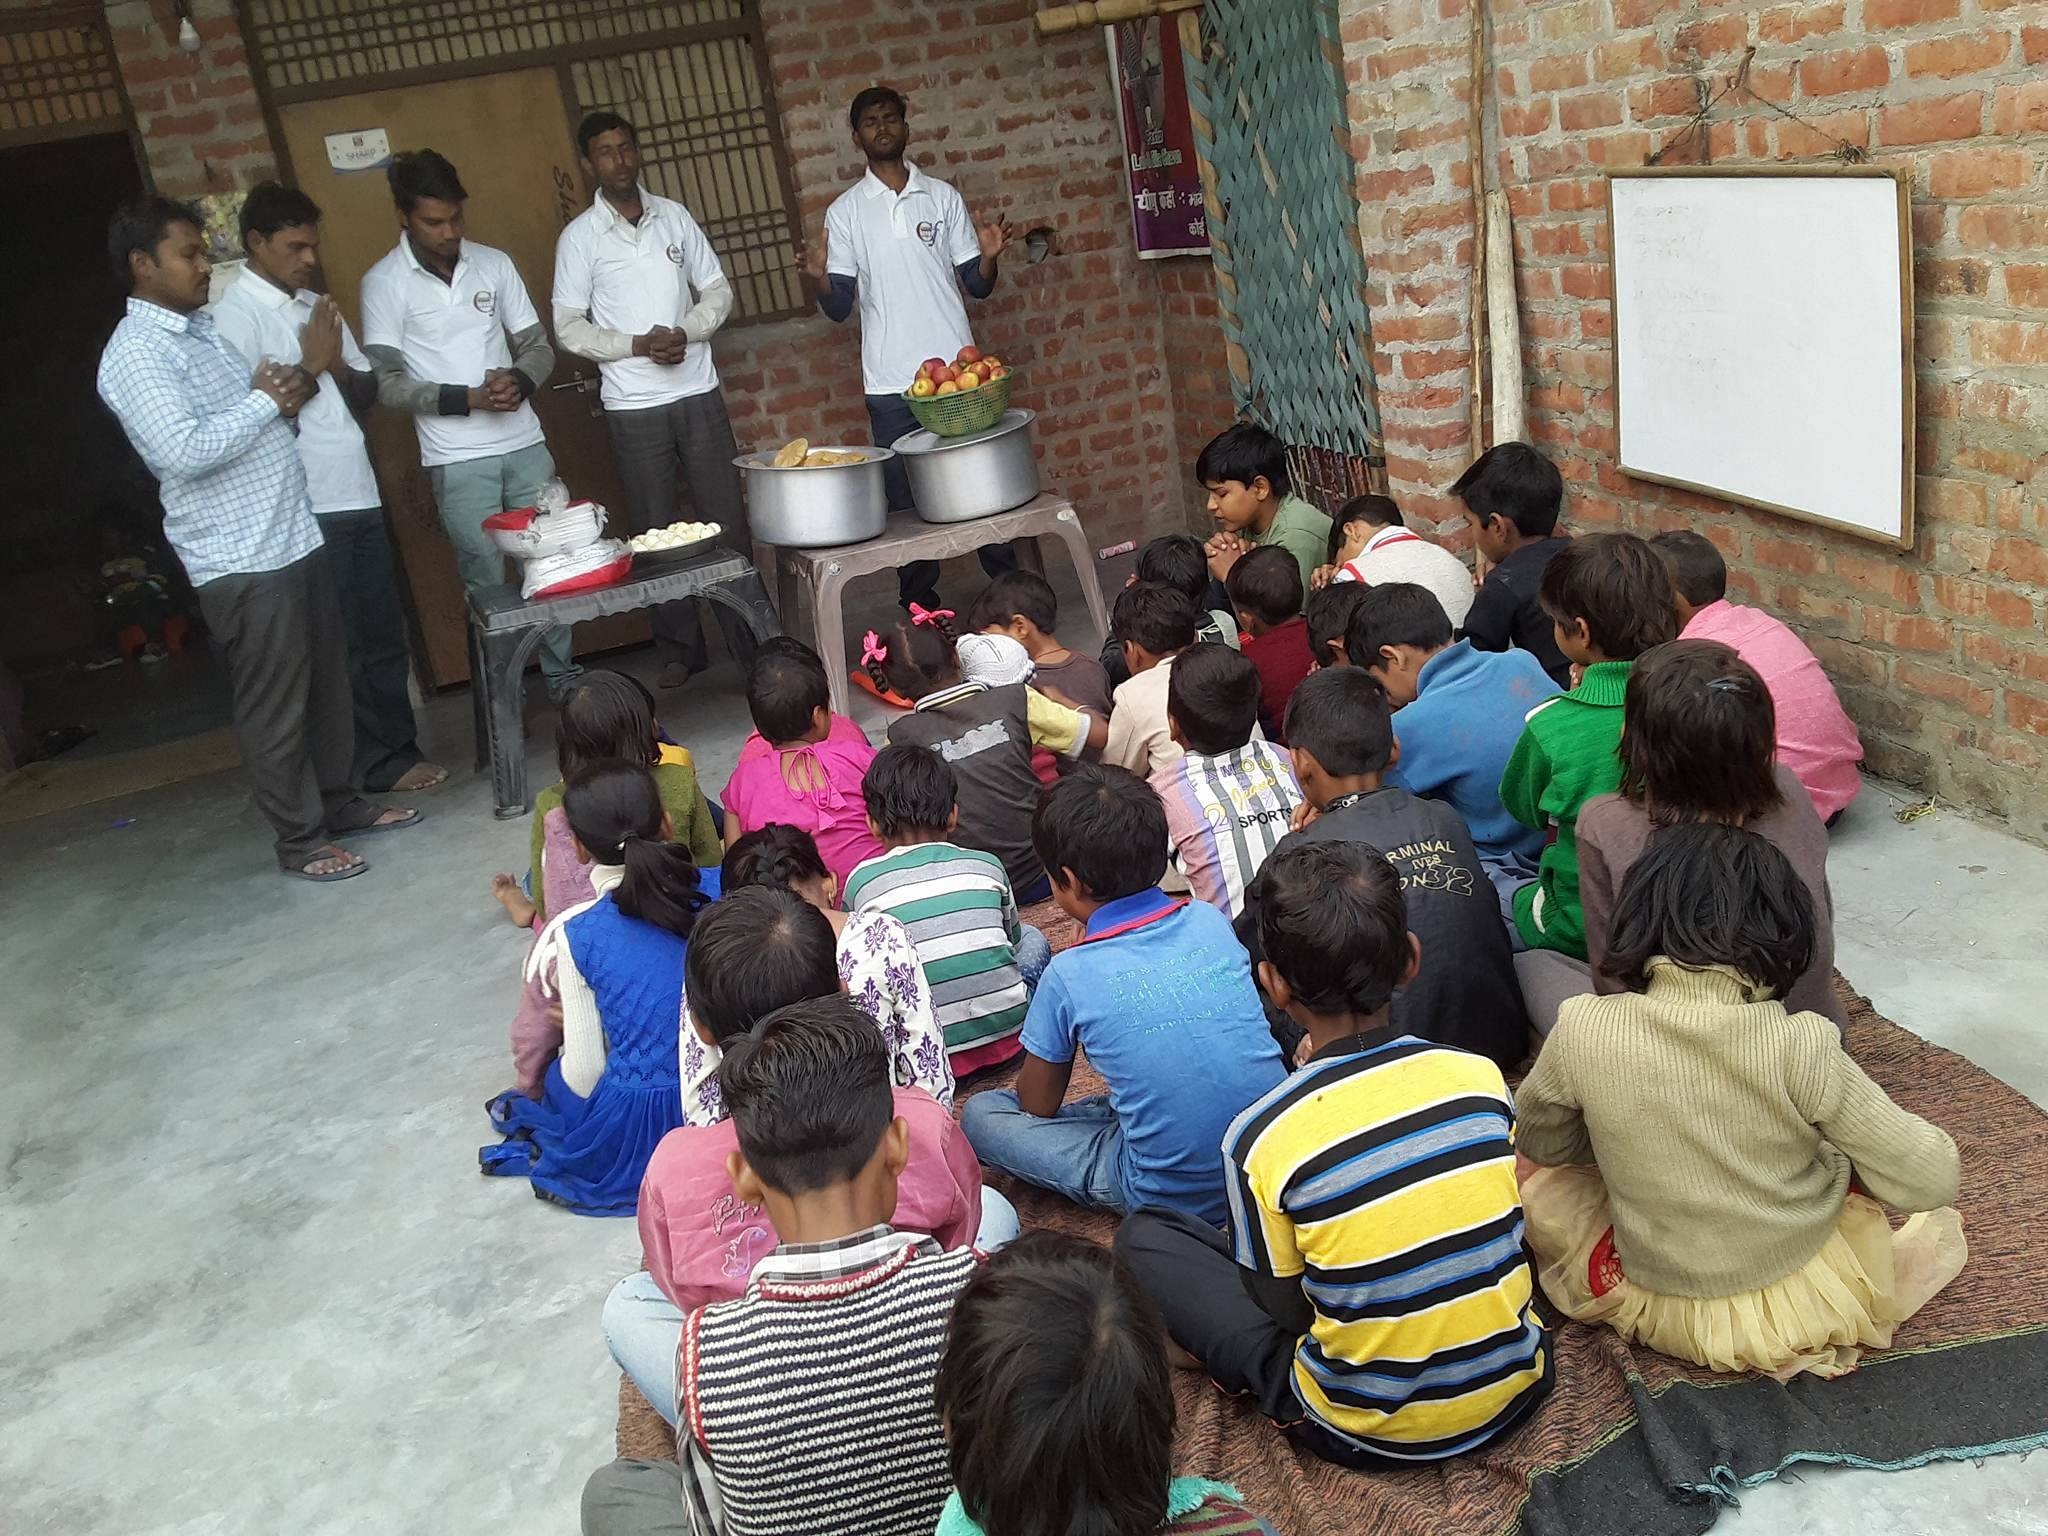   CREM International Missions   Doing Feeding Programs to Children in India.   View Gallery  